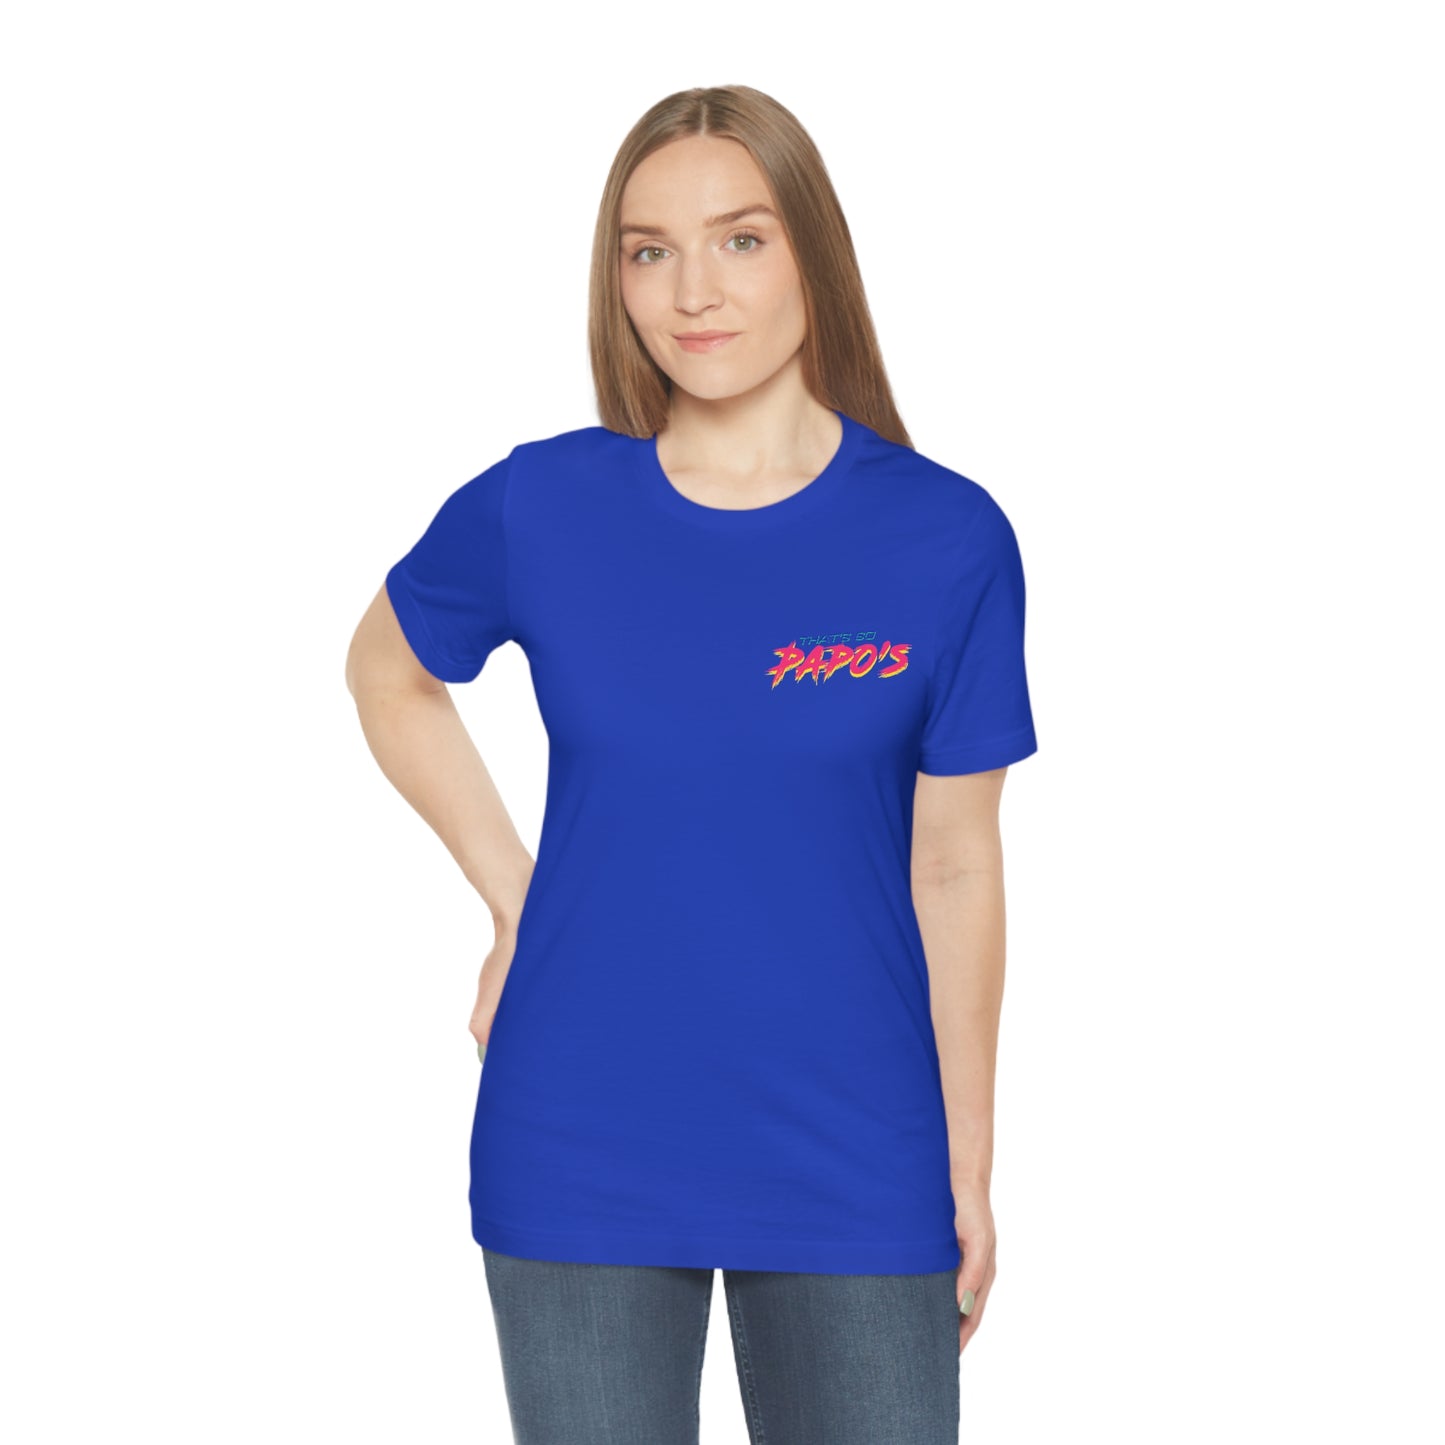 That's So PaPo's Back Logo Unisex Jersey Short Sleeve Tee